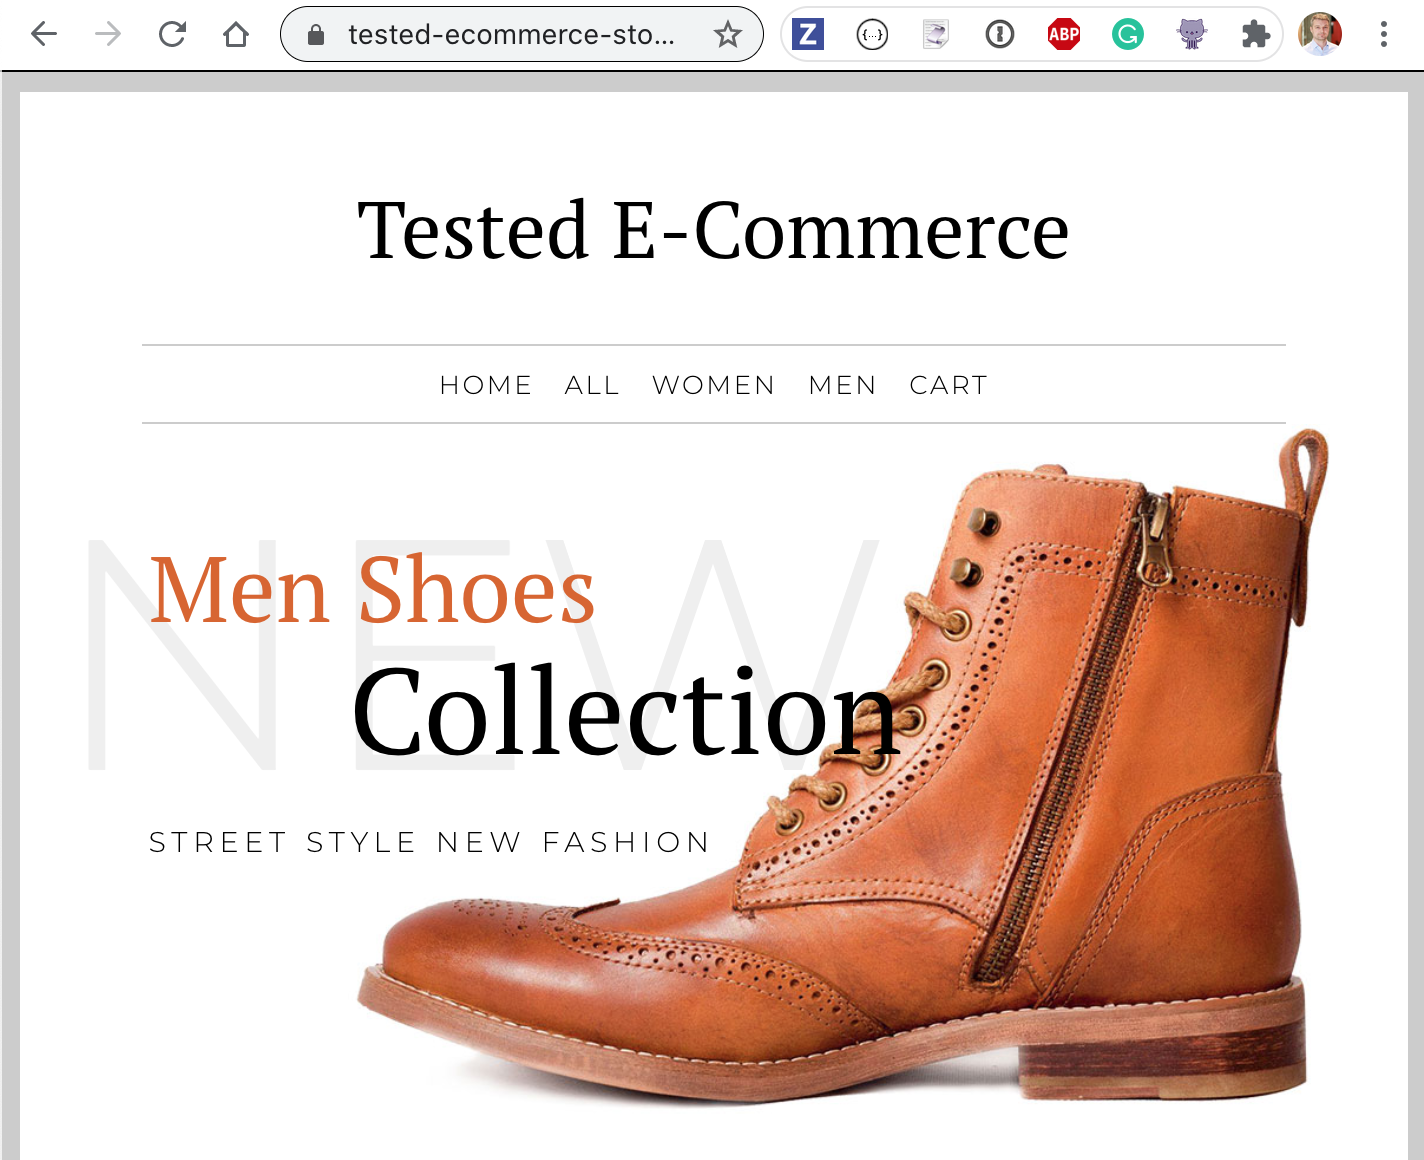 The deployed and tested e-commerce site